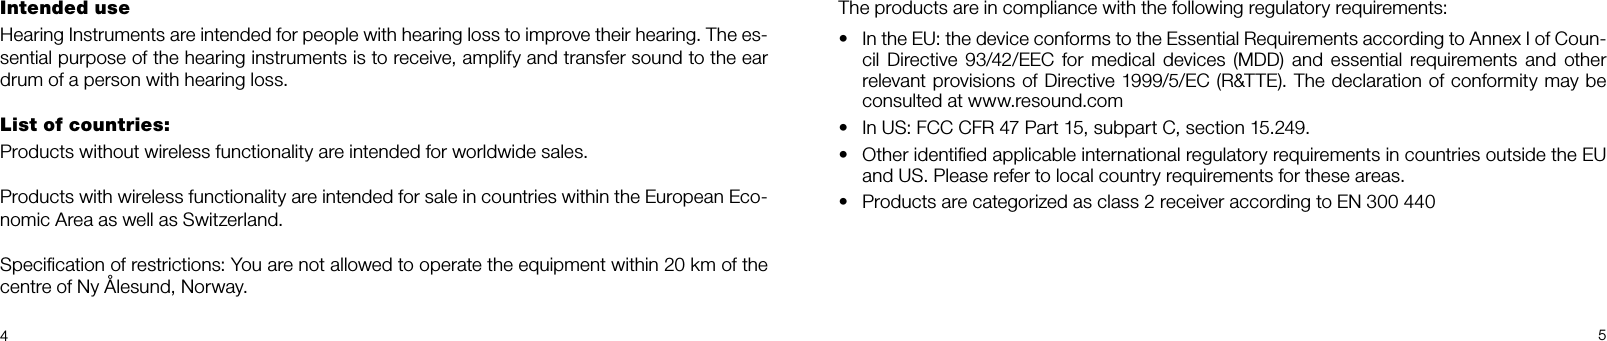 45Intended use Hearing Instruments are intended for people with hearing loss to improve their hearing. The es-sential purpose of the hearing instruments is to receive, amplify and transfer sound to the ear drum of a person with hearing loss. List of countries: Products without wireless functionality are intended for worldwide sales.Products with wireless functionality are intended for sale in countries within the European Eco-nomic Area as well as Switzerland.Speciﬁcation of restrictions: You are not allowed to operate the equipment within 20 km of the centre of Ny Ålesund, Norway.The products are in compliance with the following regulatory requirements: •  In the EU: the device conforms to the Essential Requirements according to Annex I of Coun-cil  Directive  93/42/EEC  for medical  devices  (MDD)  and  essential requirements and  other relevant provisions of Directive 1999/5/EC (R&amp;TTE). The declaration of conformity may be consulted at www.resound.com•  In US: FCC CFR 47 Part 15, subpart C, section 15.249. •  Other identiﬁed applicable international regulatory requirements in countries outside the EU and US. Please refer to local country requirements for these areas.•  Products are categorized as class 2 receiver according to EN 300 440